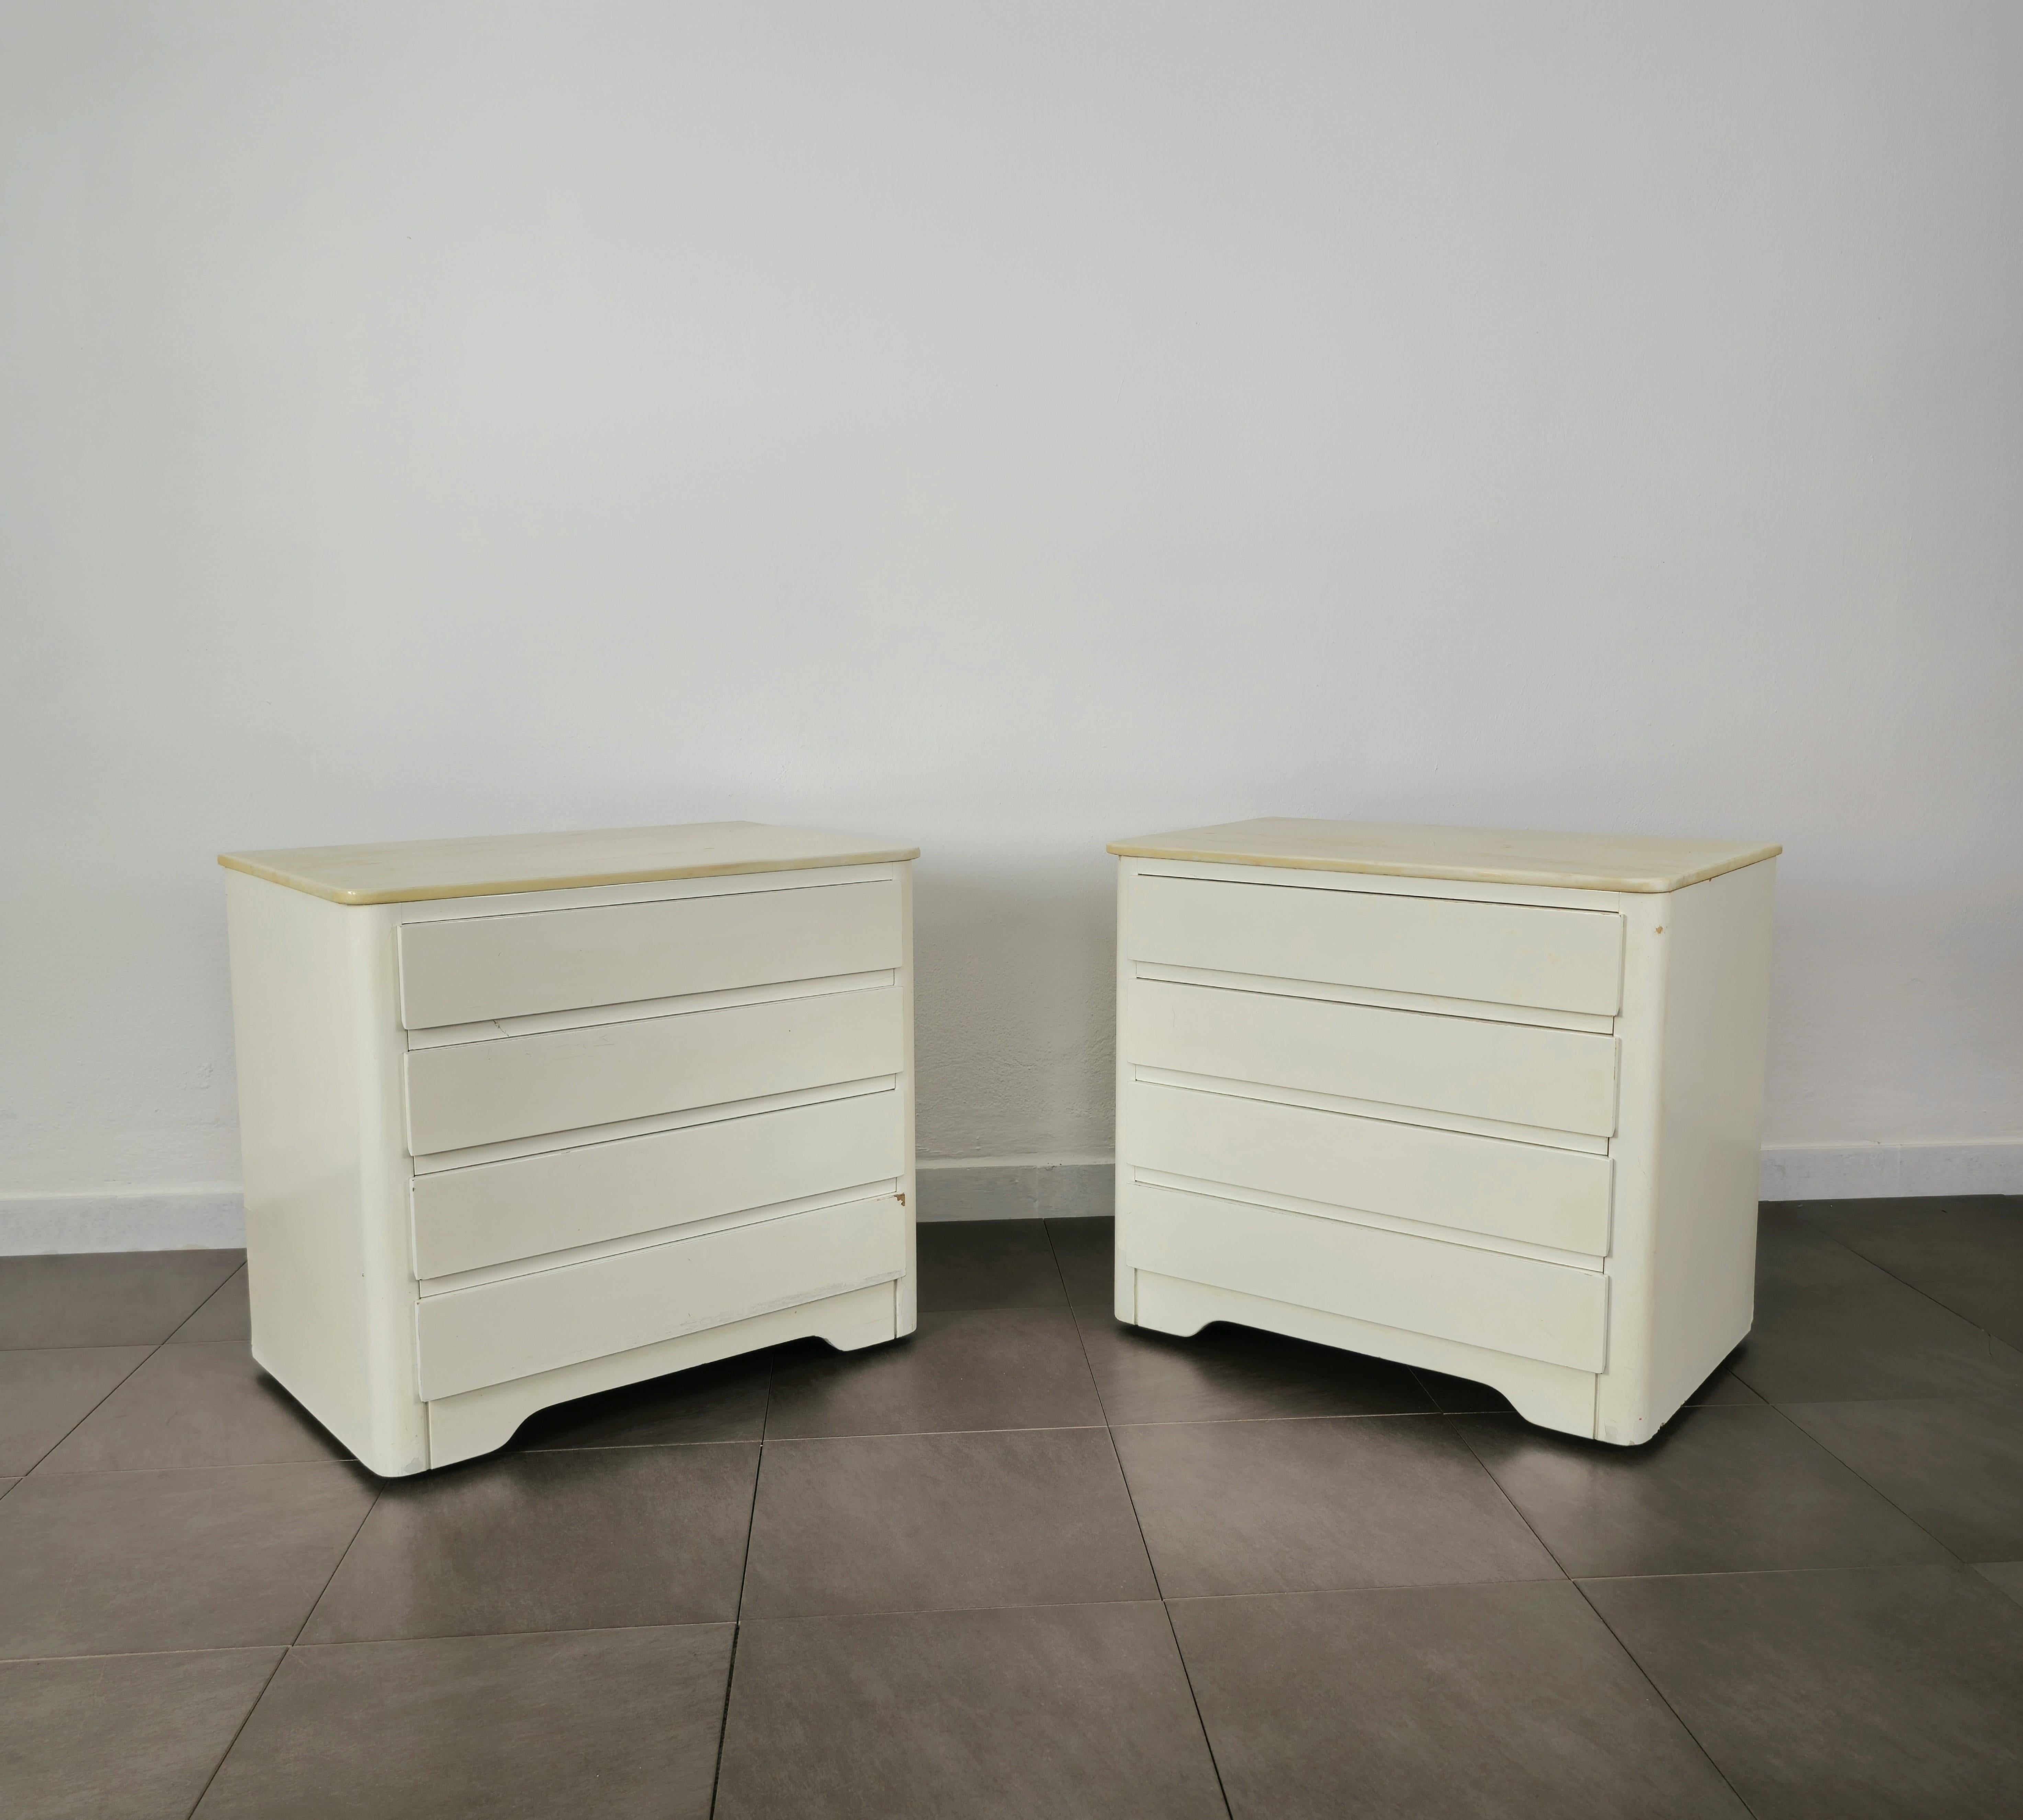 Pair of bedside tables produced in Italy in the 70s.
Each single bedside table that can be directed by wheels was made of white enamelled wood with 4 drawers and a marble top.



Note: We try to offer our customers an excellent service even in